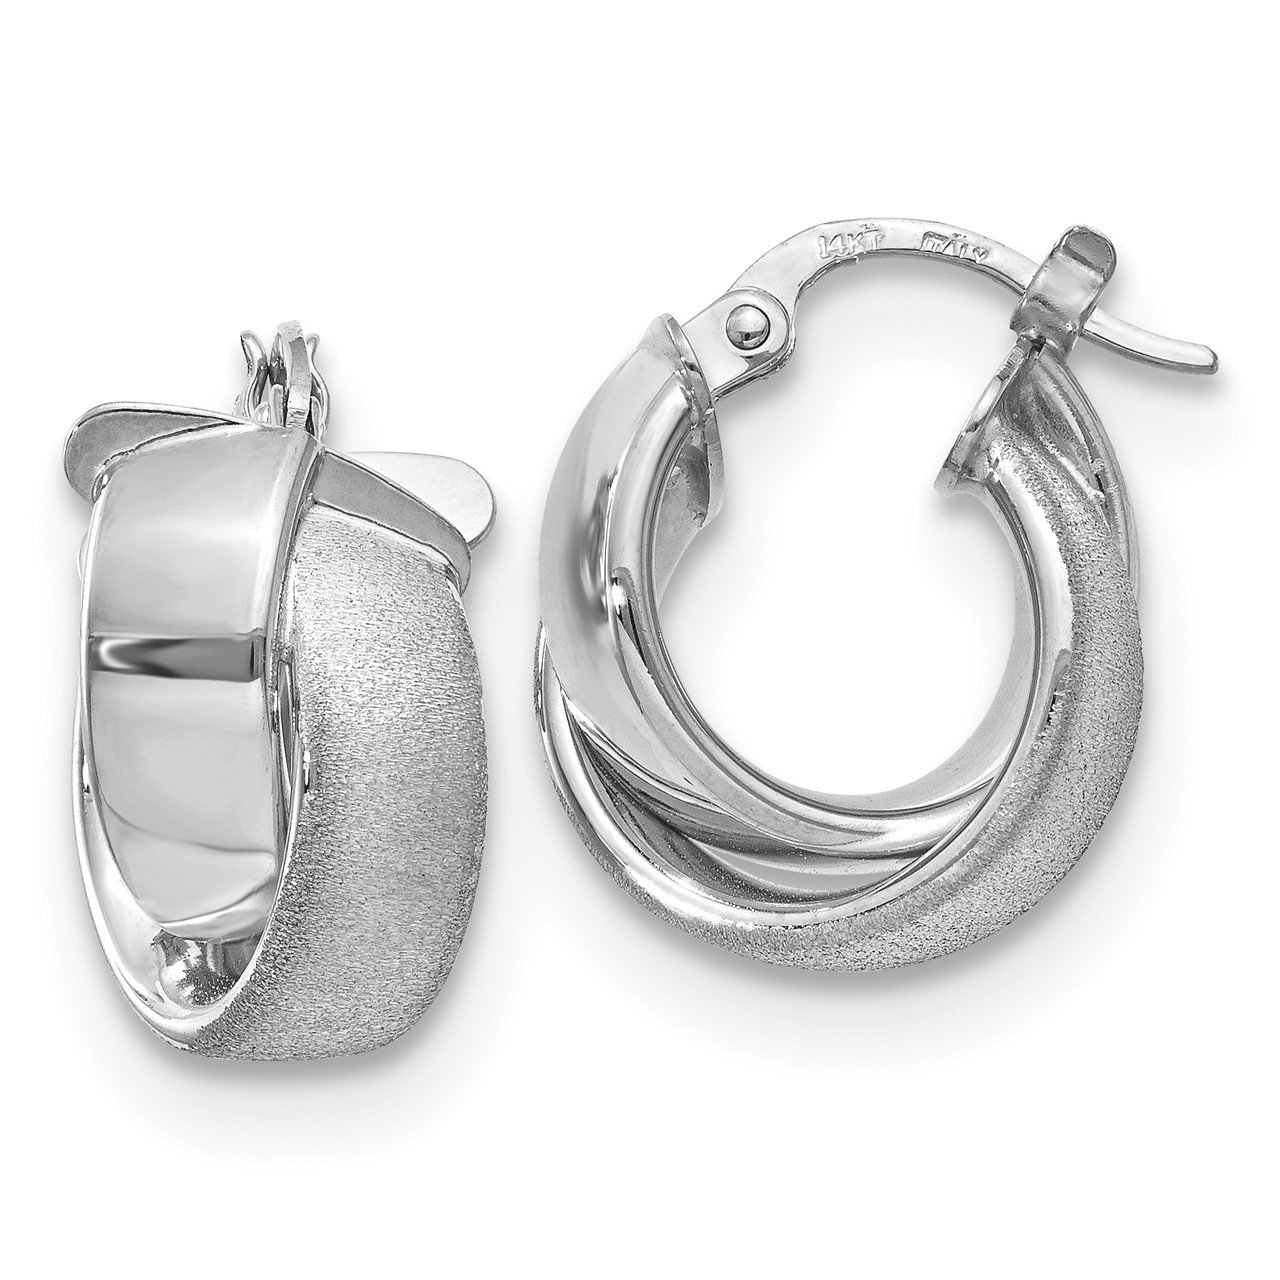 Leslie's 14K White Gold Polished and Satin Hoop Earrings